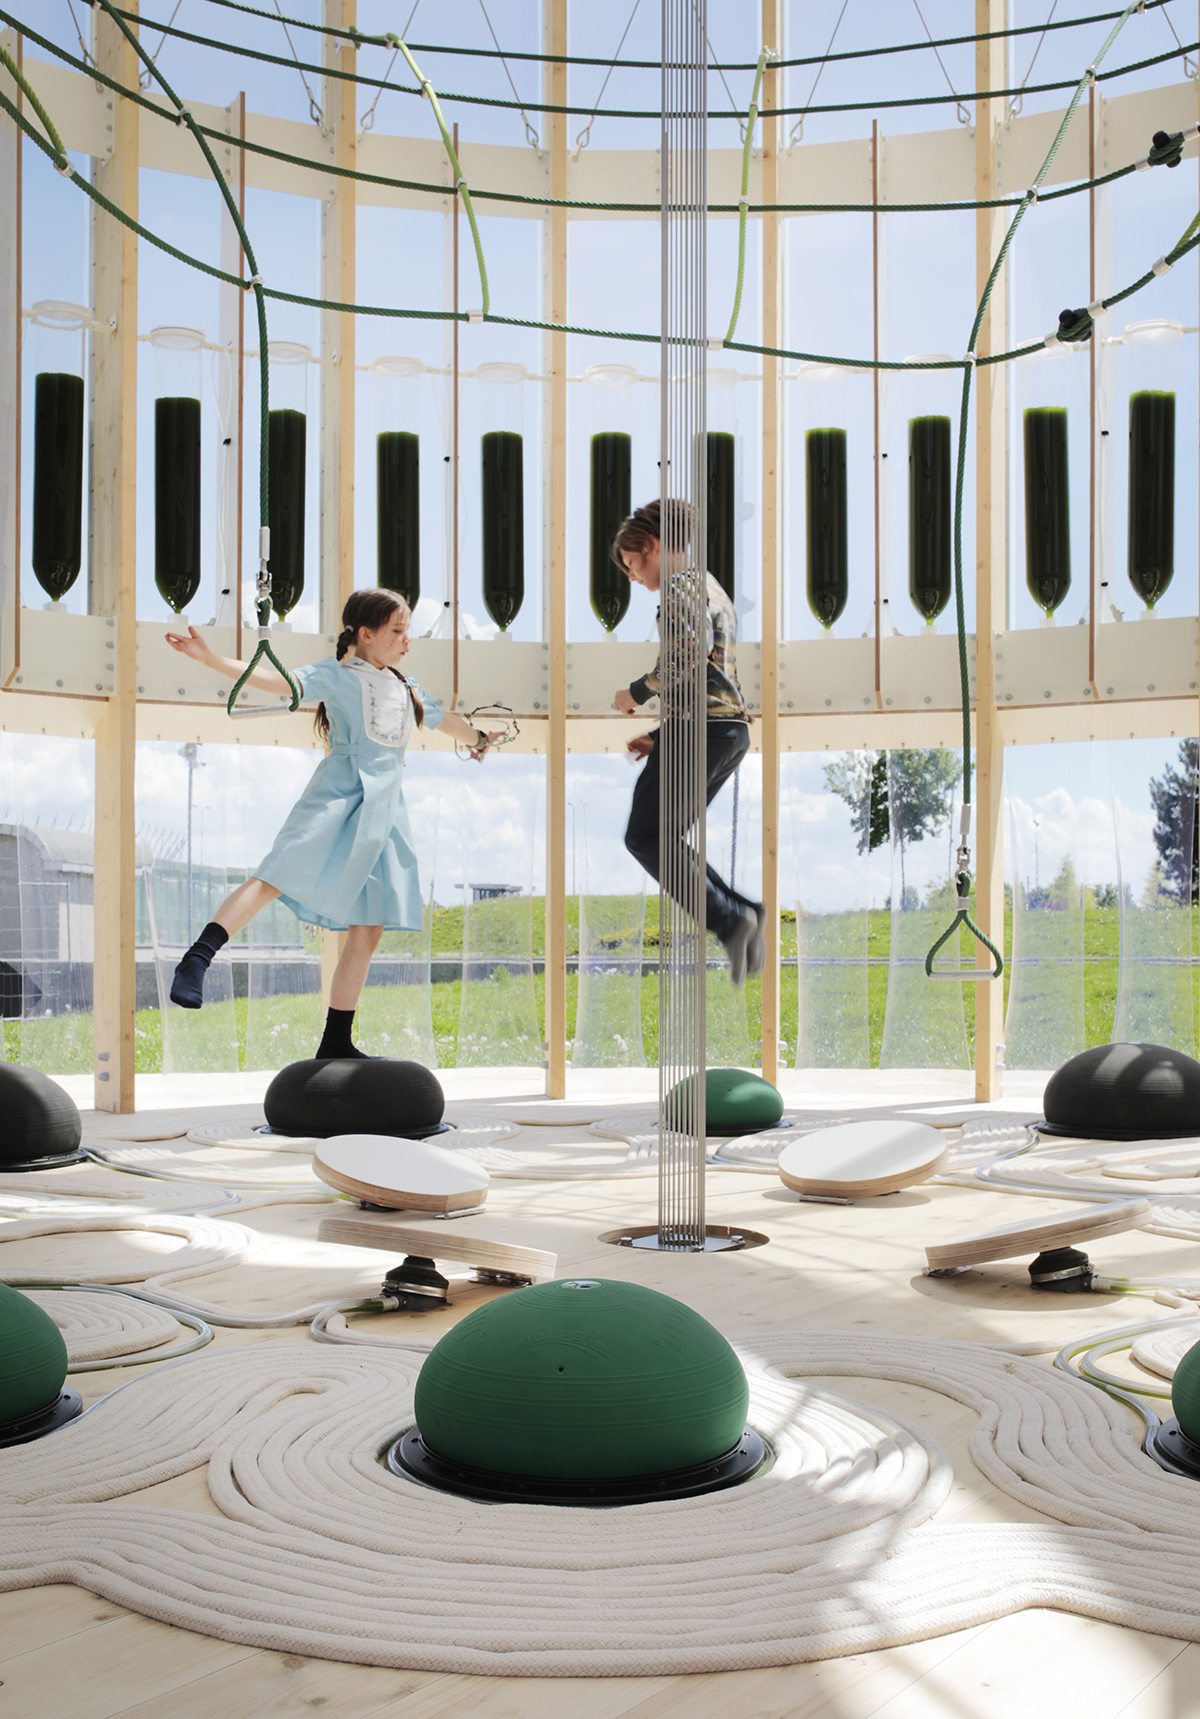 AirBubble Playground - The World's First Biotechnology Playroom